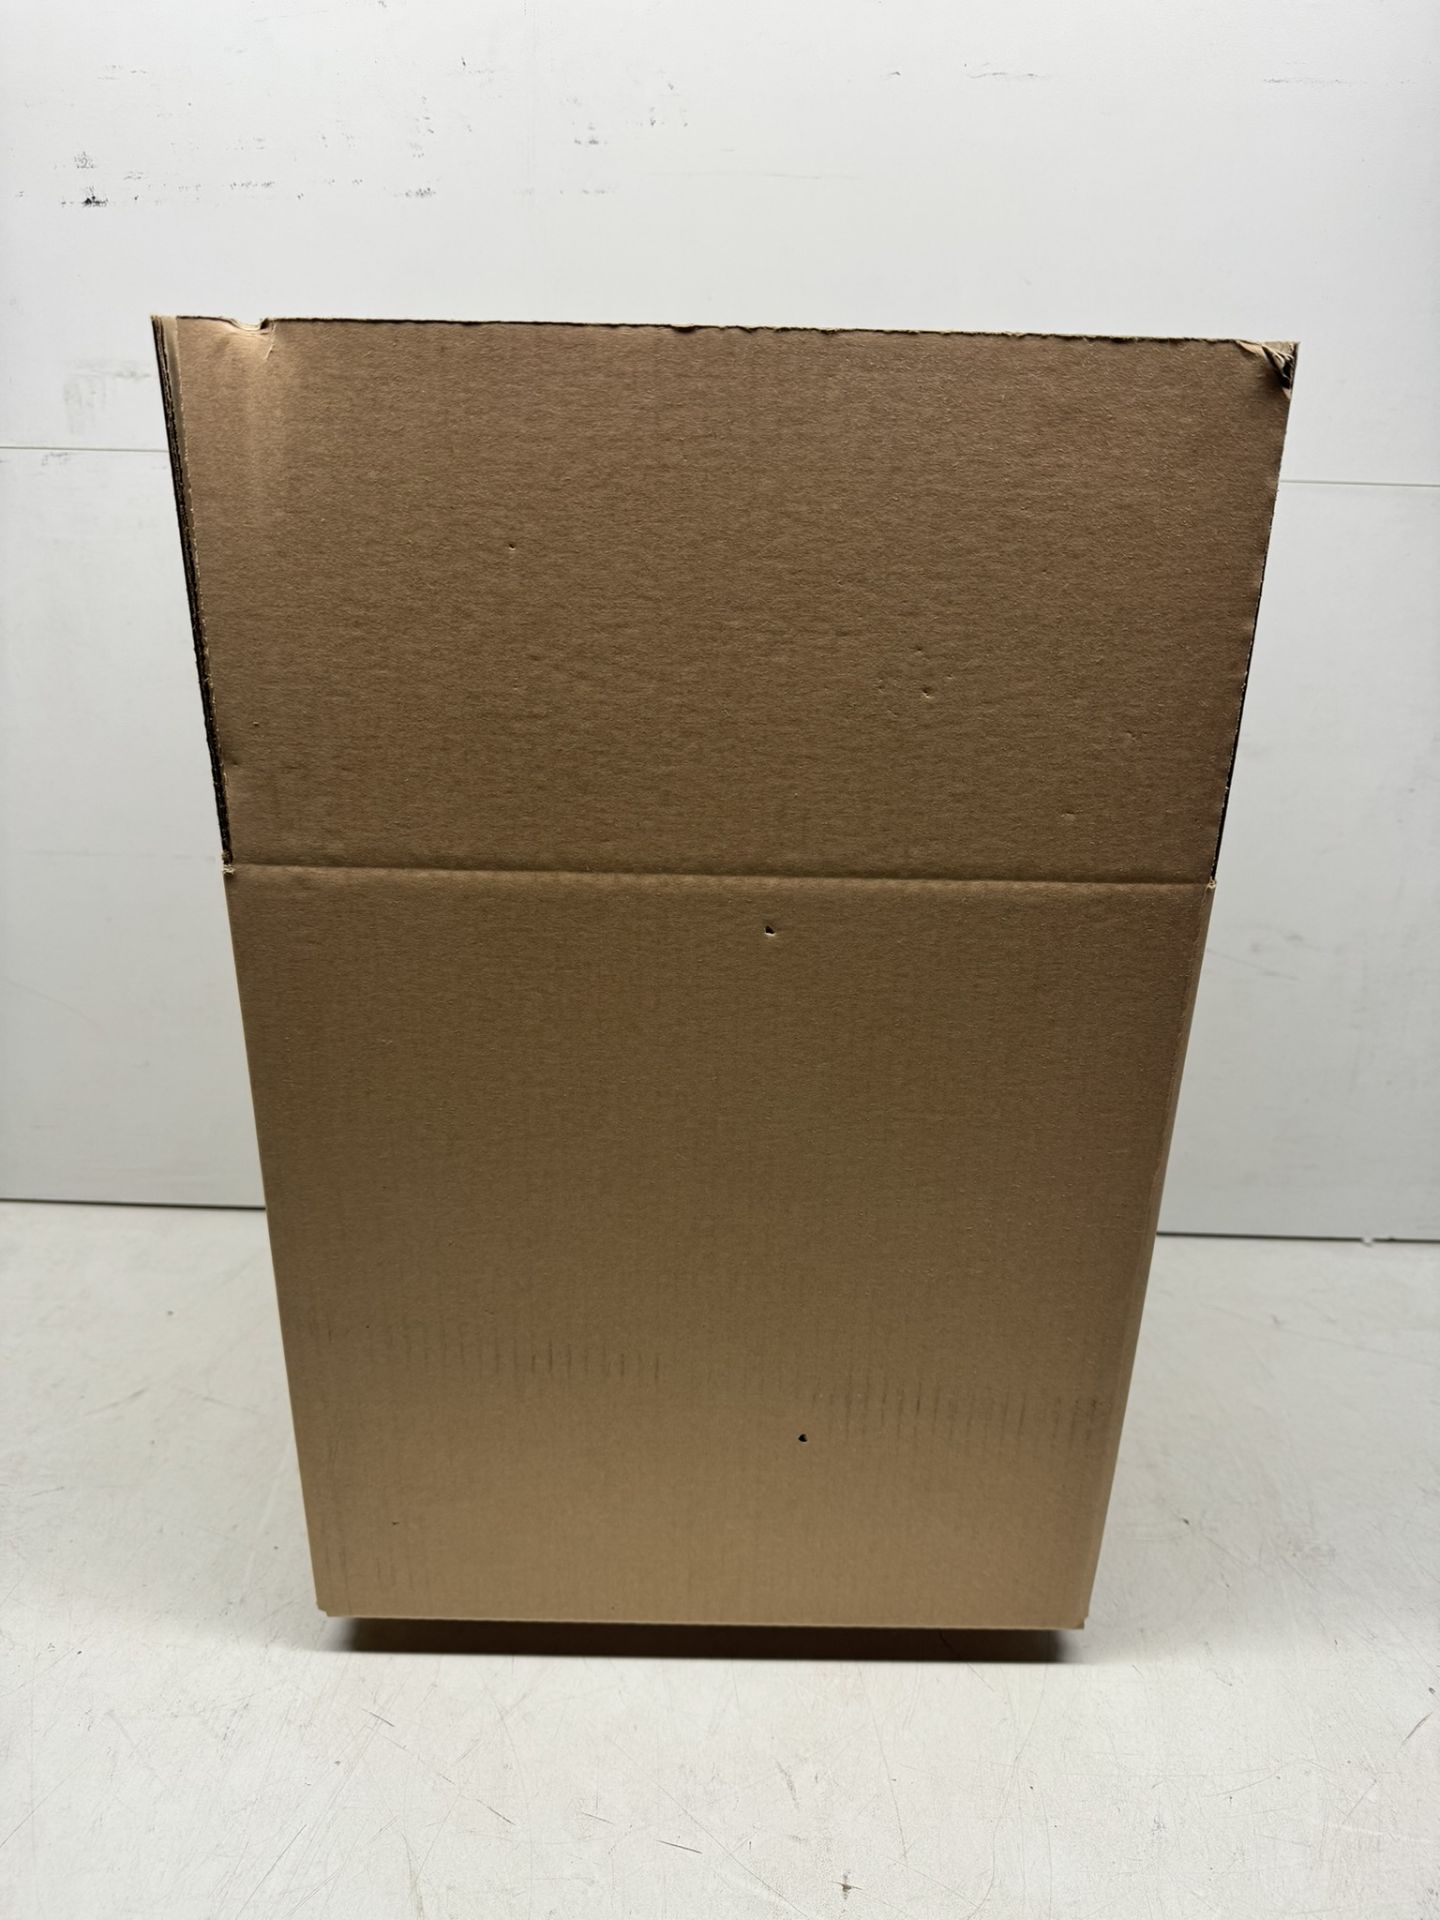 260 x Kilby Packaging Double Wall Cardboard Boxes | 310 x 310 x 310MM